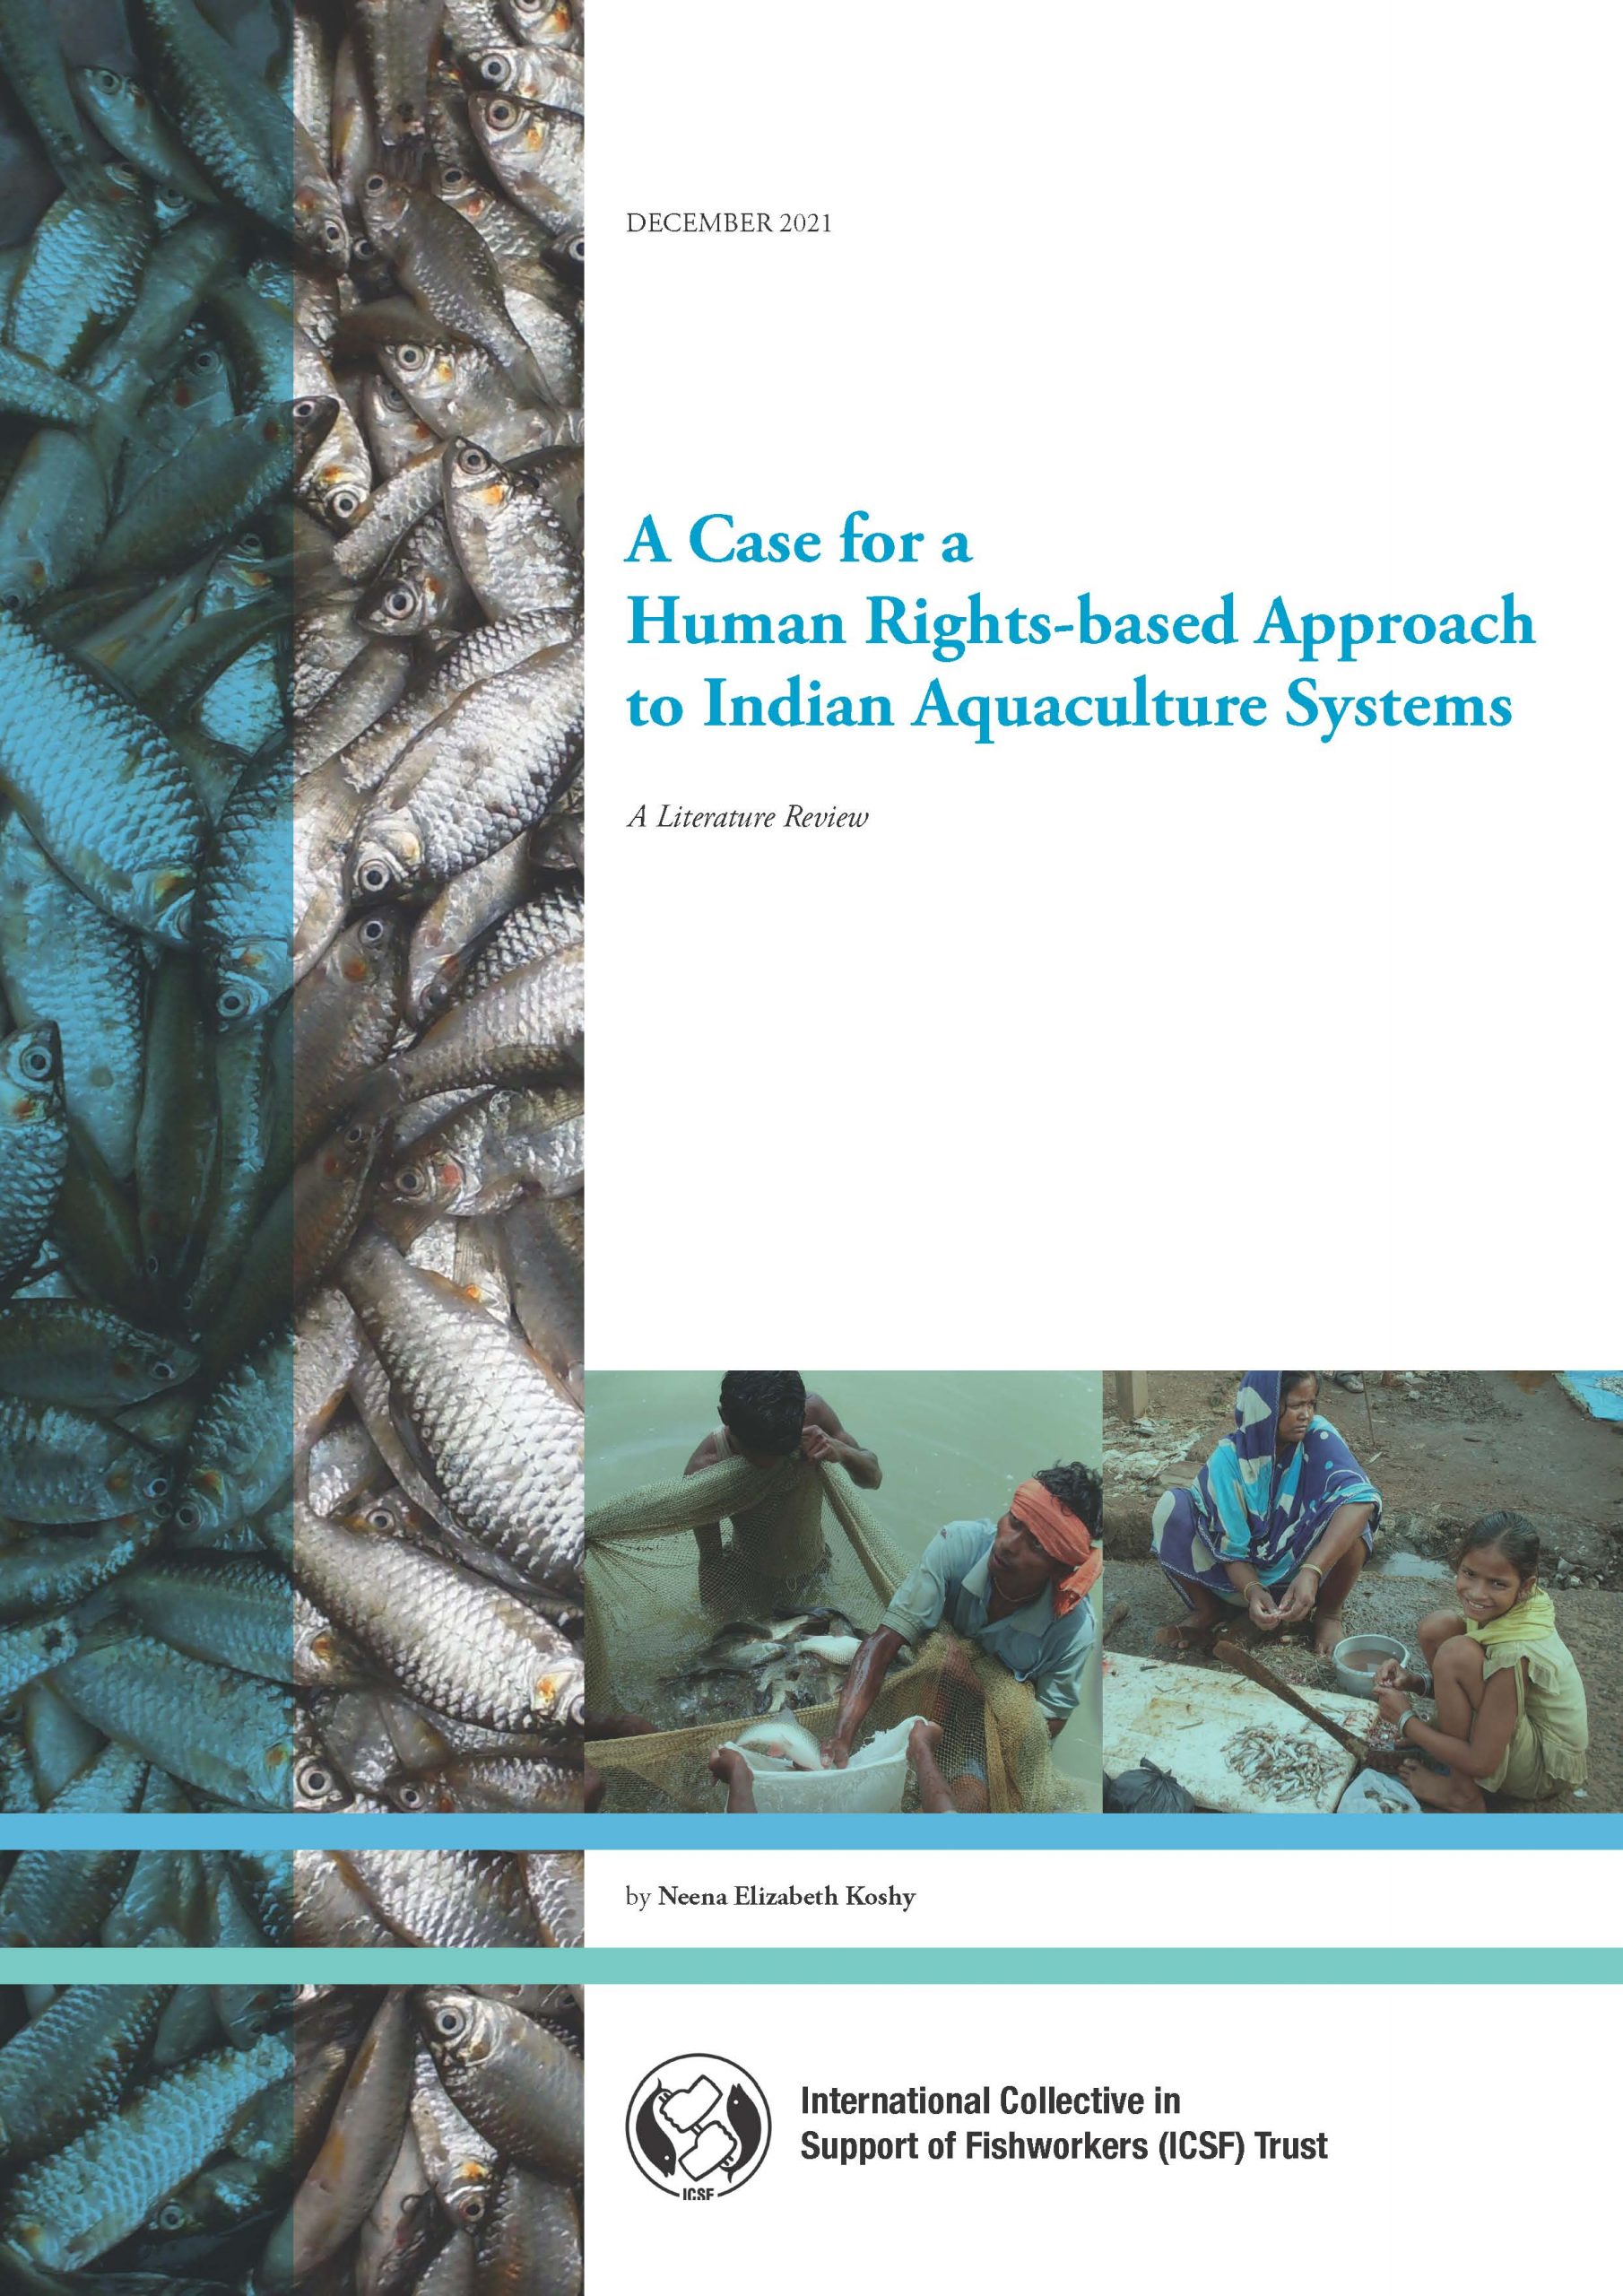 A Case for a Human Rights-based Approach to Indian Aquaculture Systems: A Literature Review by Neena Elizabeth Koshy